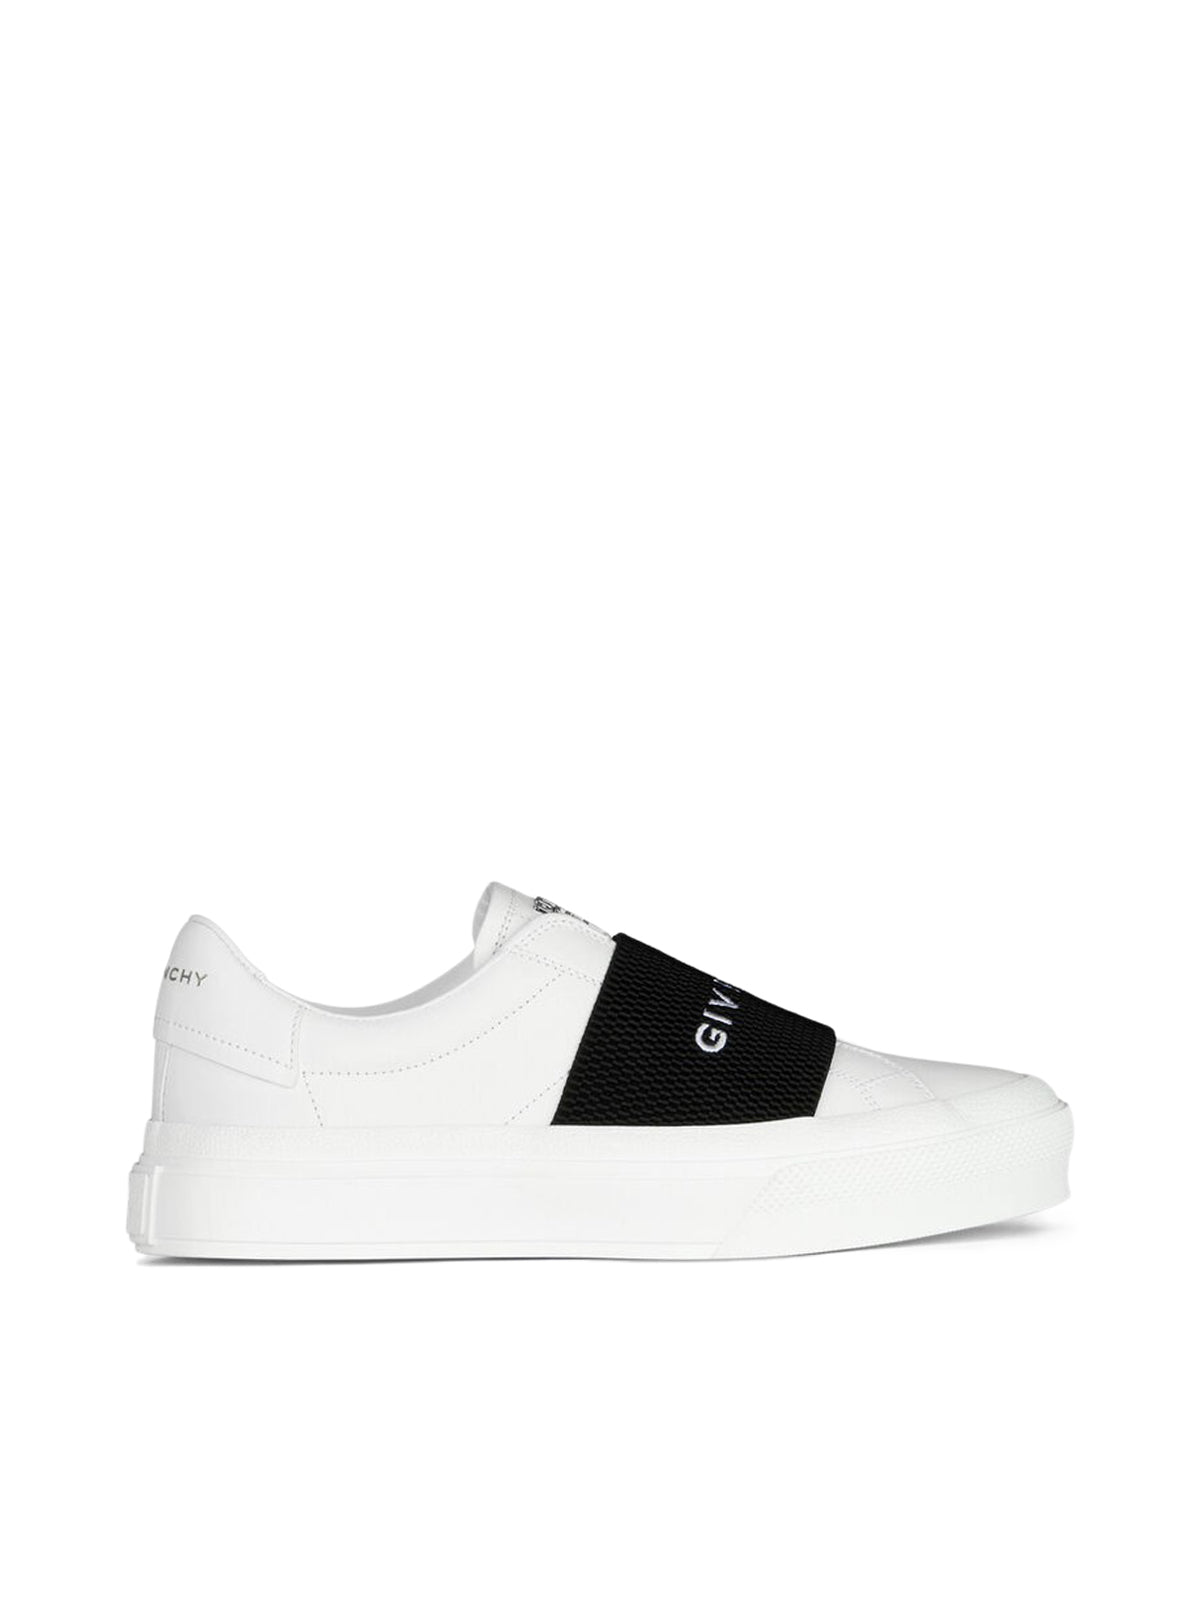 SNEAKERS IN LEATHER WITH GIVENCHY WEBBING